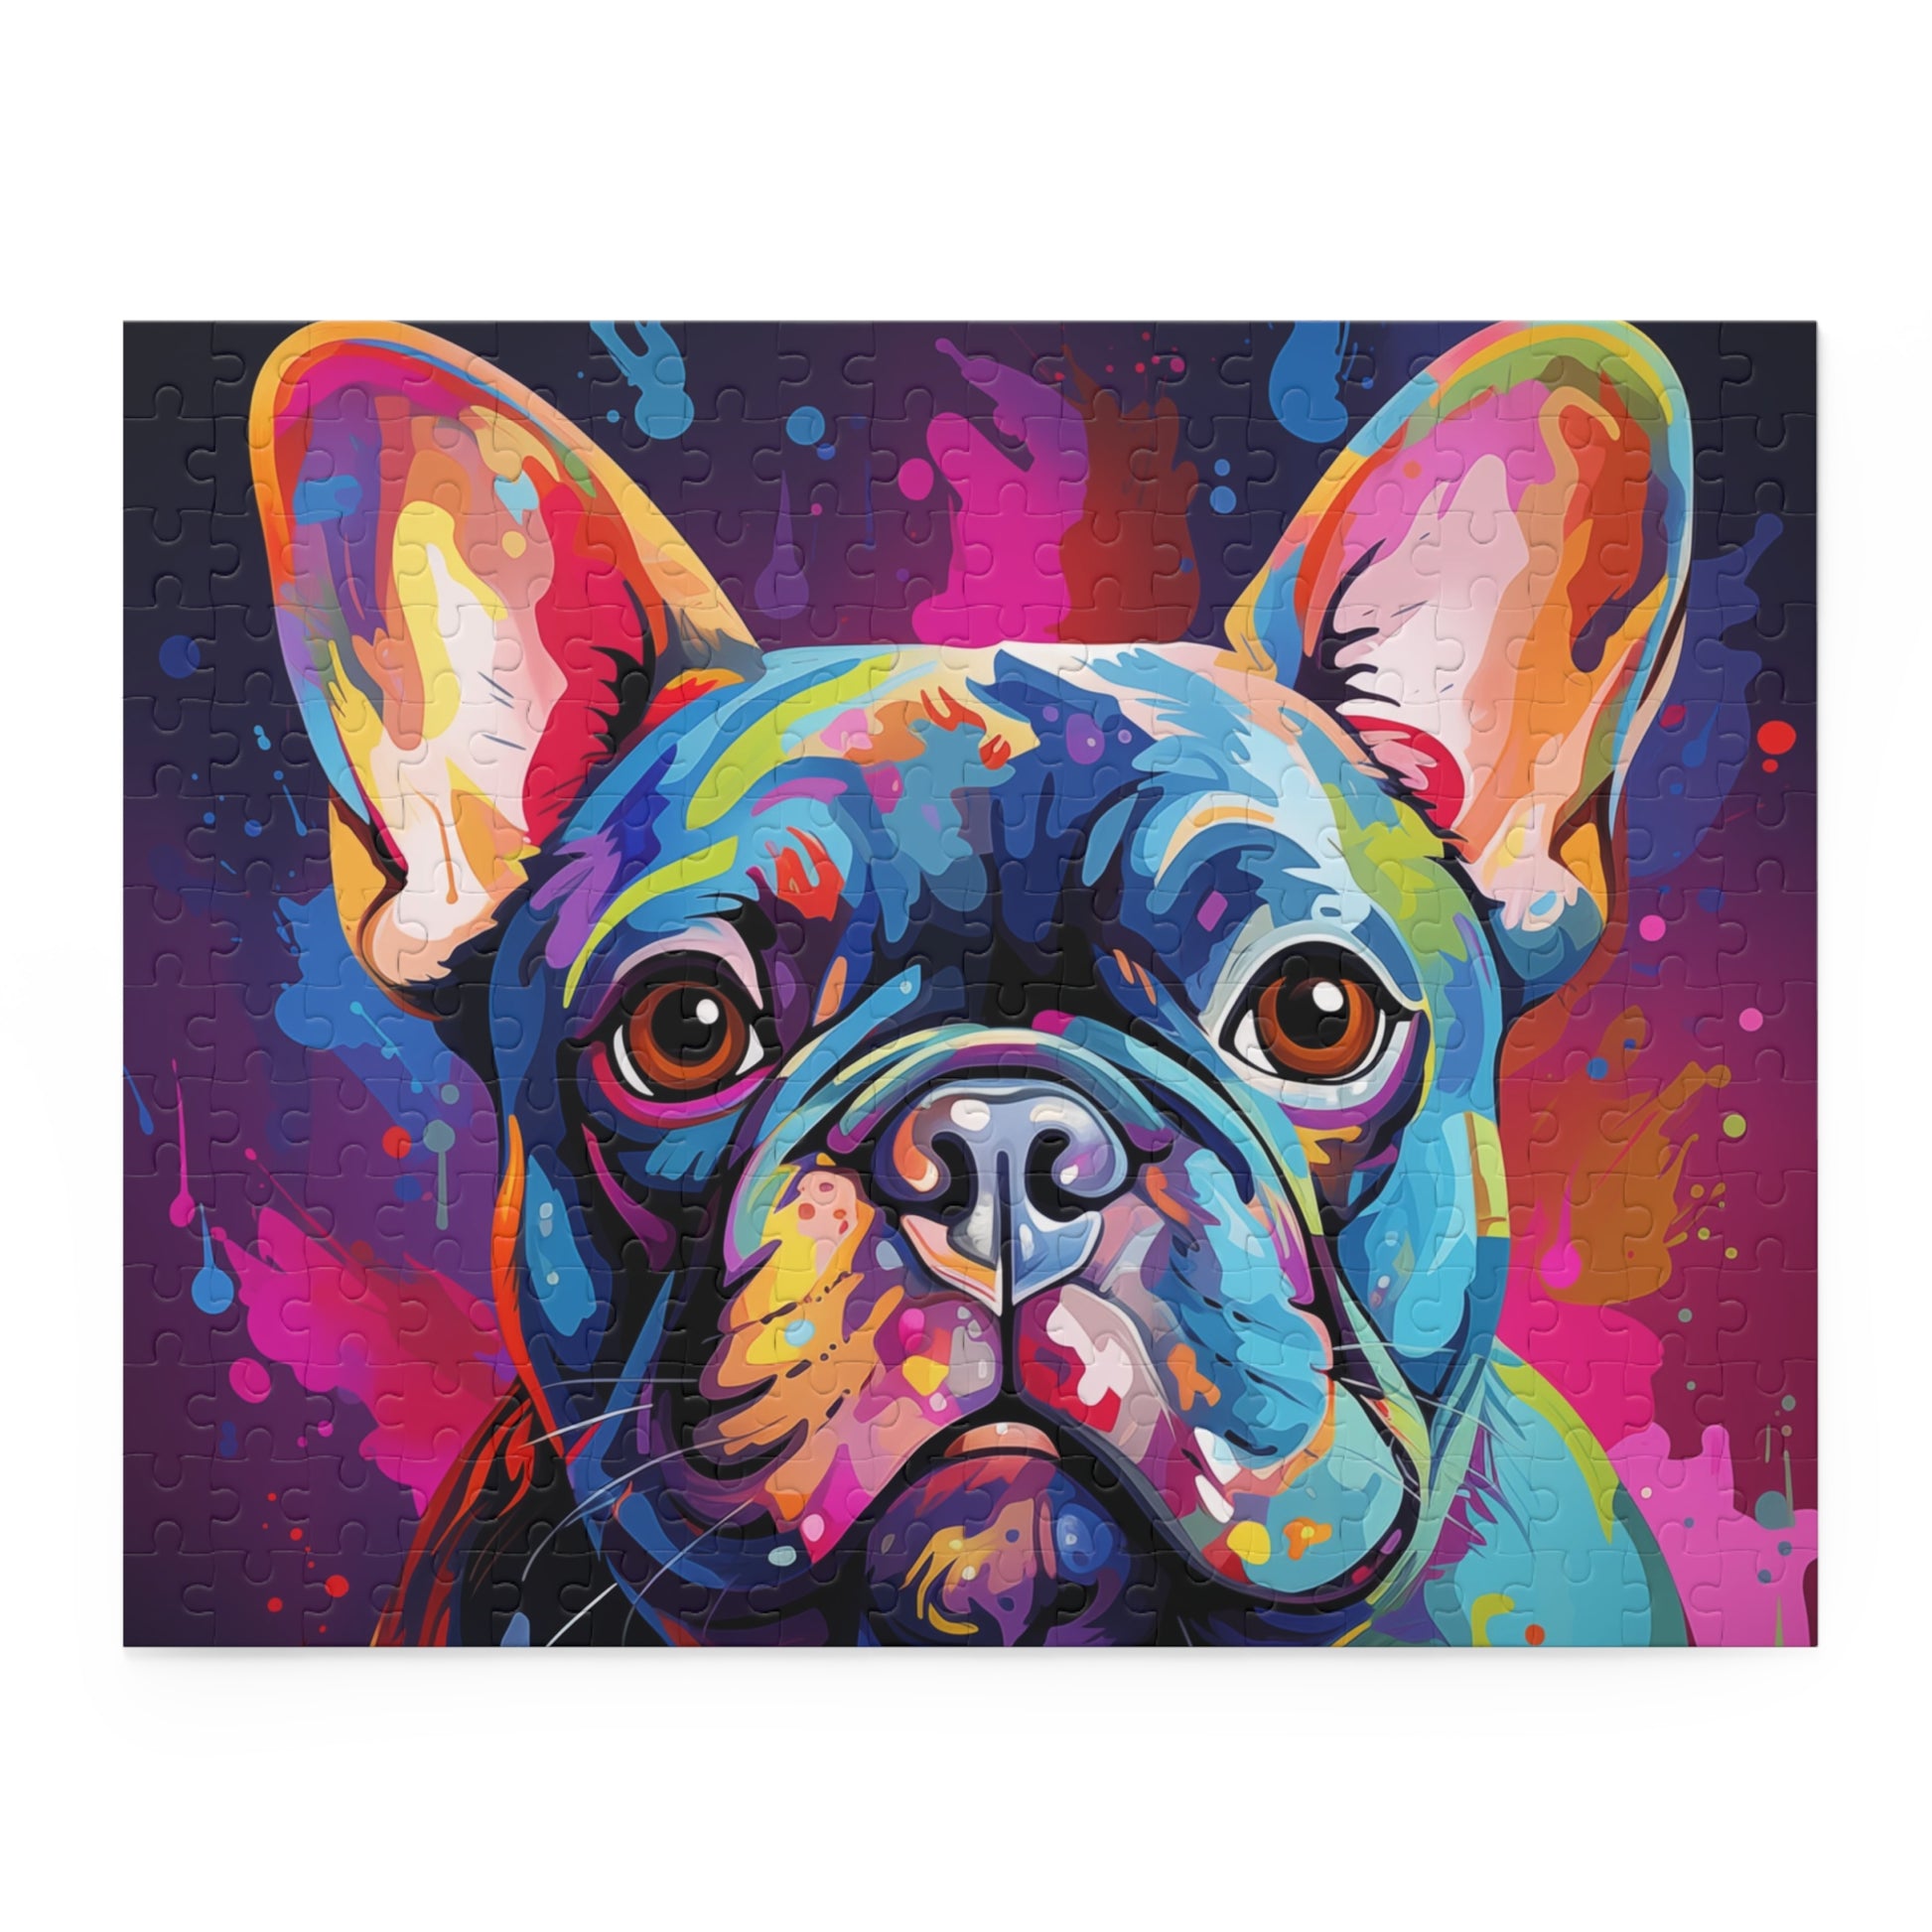 Oil Paint Watercolor Abstract Frenchie Dog Jigsaw Puzzle Adult Birthday Business Jigsaw Puzzle Gift for Him Funny Humorous Indoor Outdoor Game Gift For Her Online-3